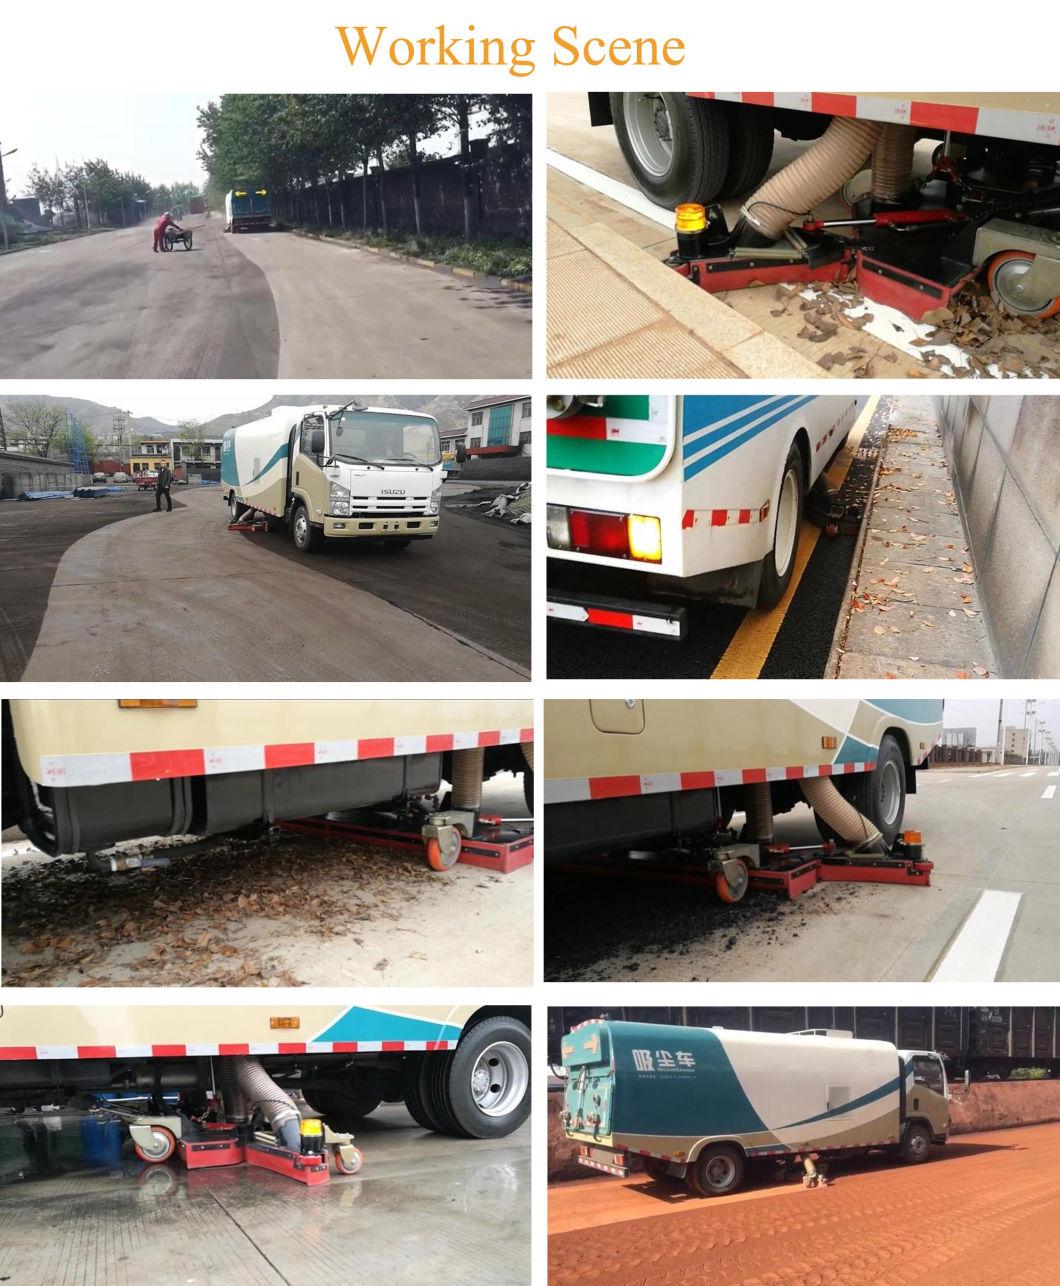 3cbm Small Sweeping Vehicle Dongfeng Truck Mounted Sweeper